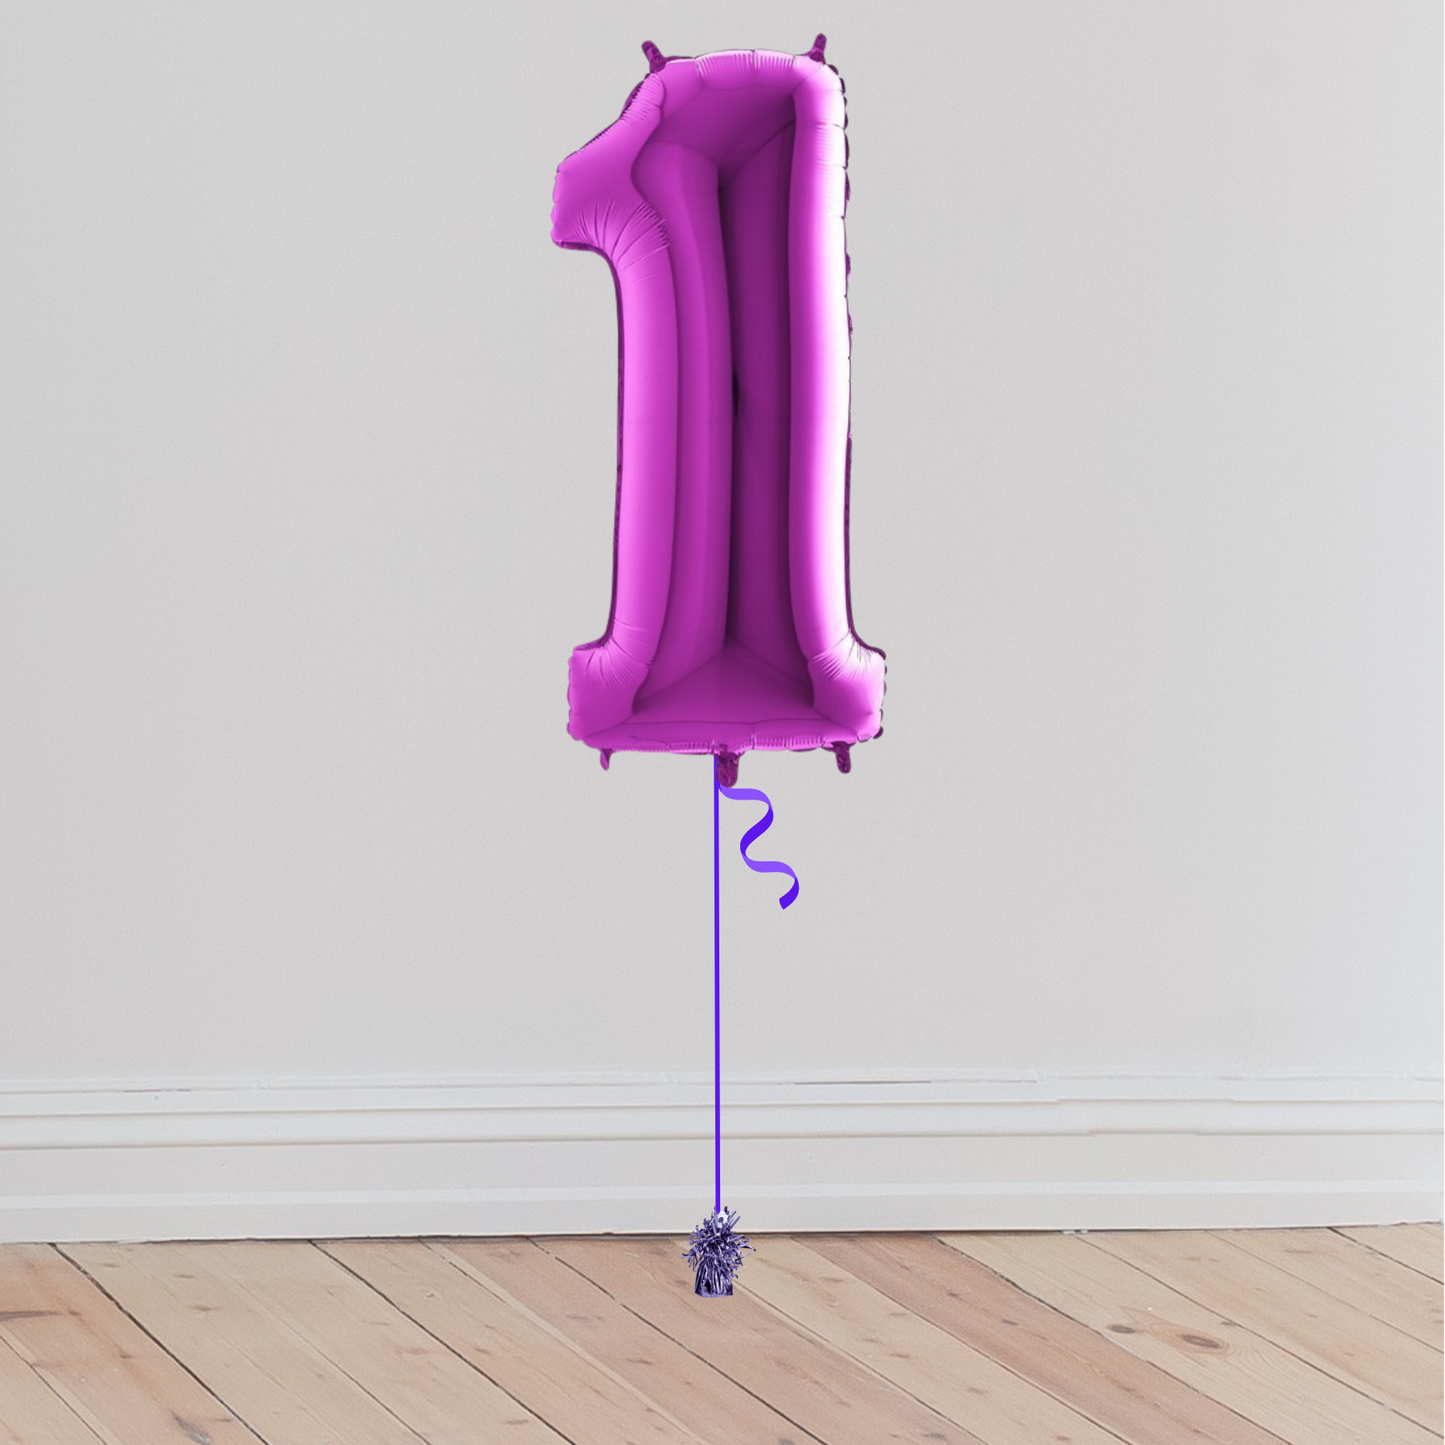 <b> ONLINE EXCLUSIVE </b> <br>Giant Purple Number Balloon <br>(Inflated with Helium & Weight Included)